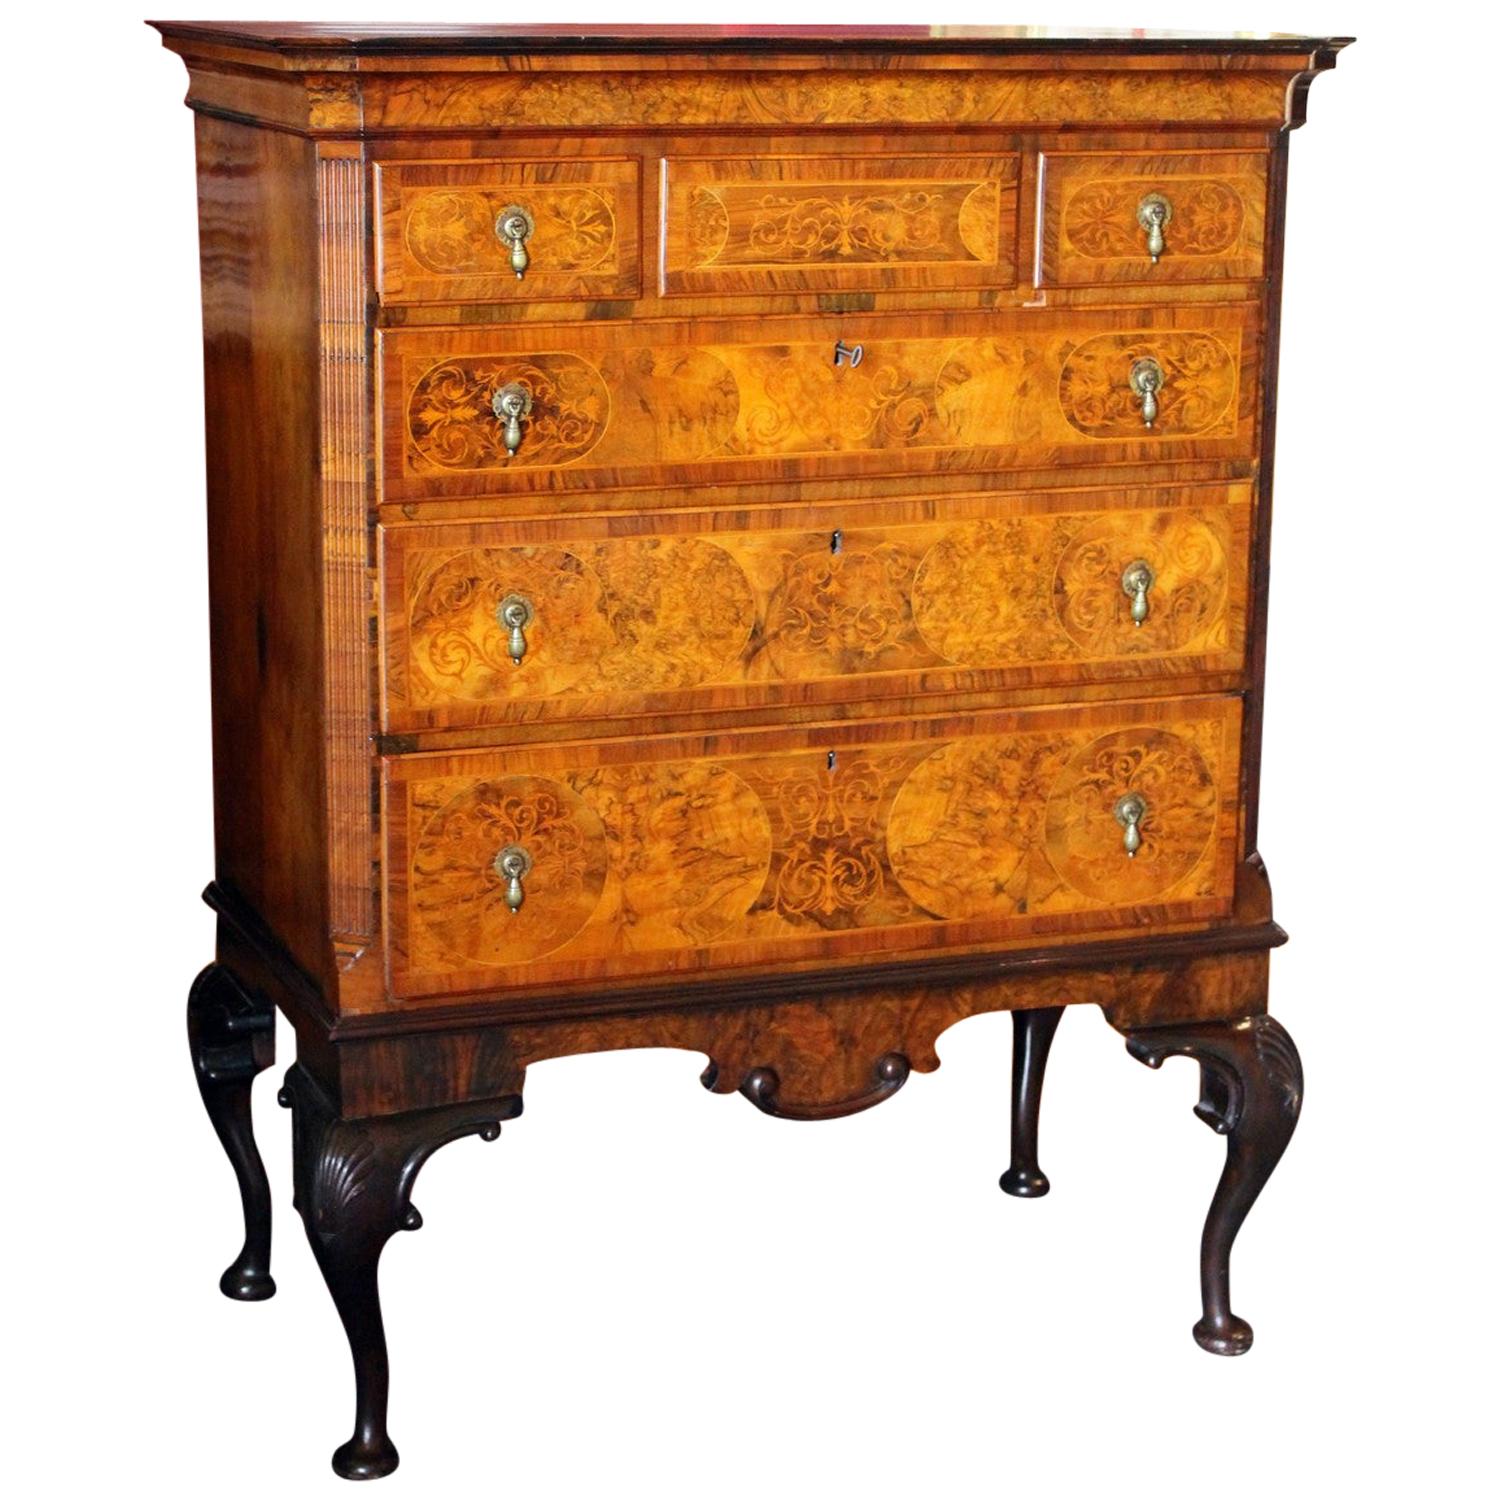 English George II Style Burl Walnut and Marquetry Chest on Stand or Highboy